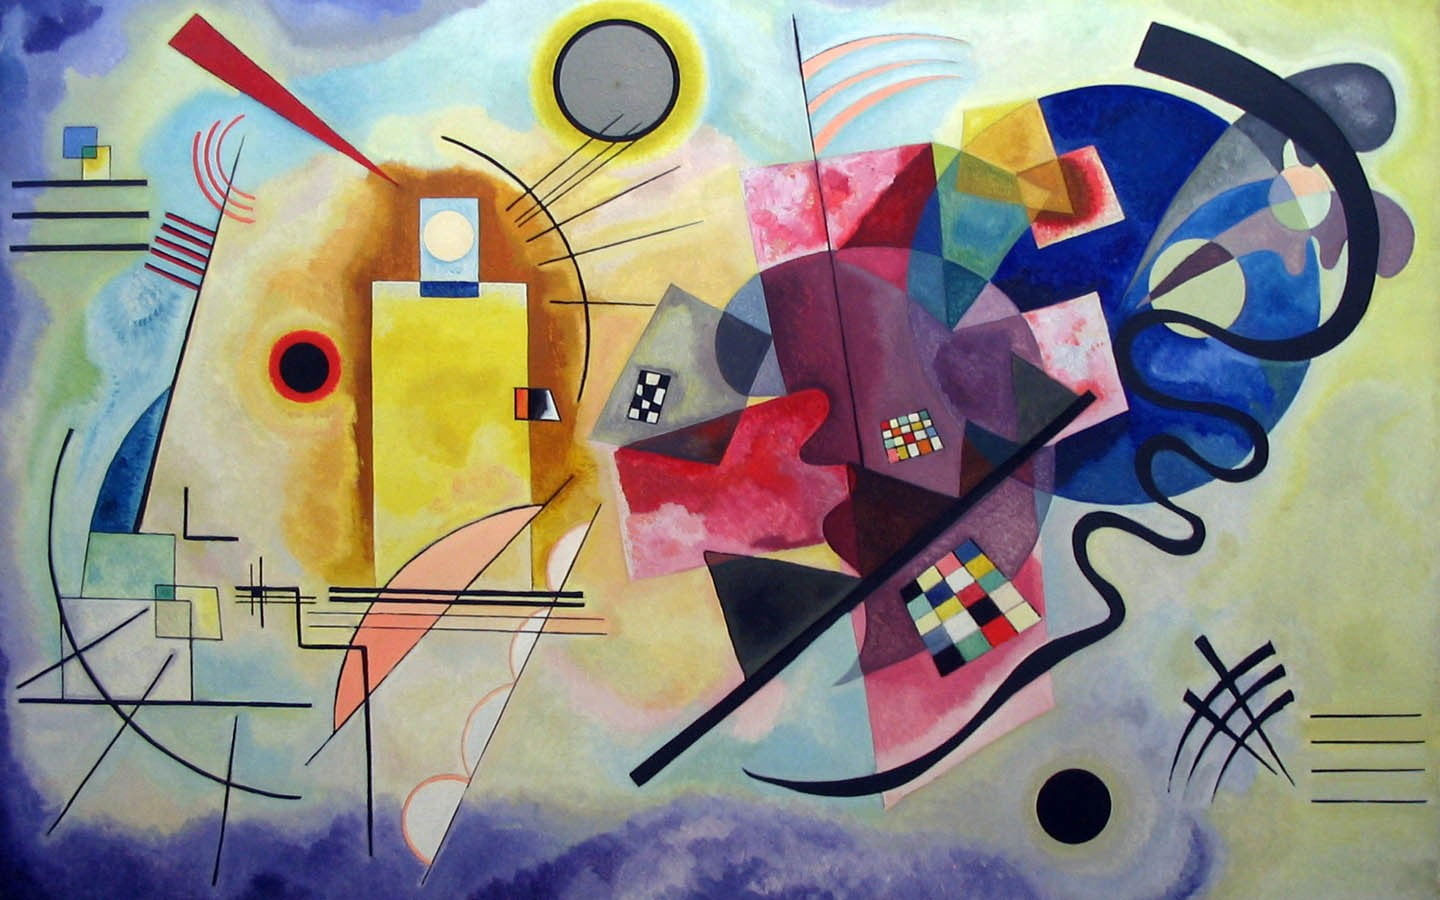 Multicolored abstract painting wallpaper, Wassily Kandinsky, classic art